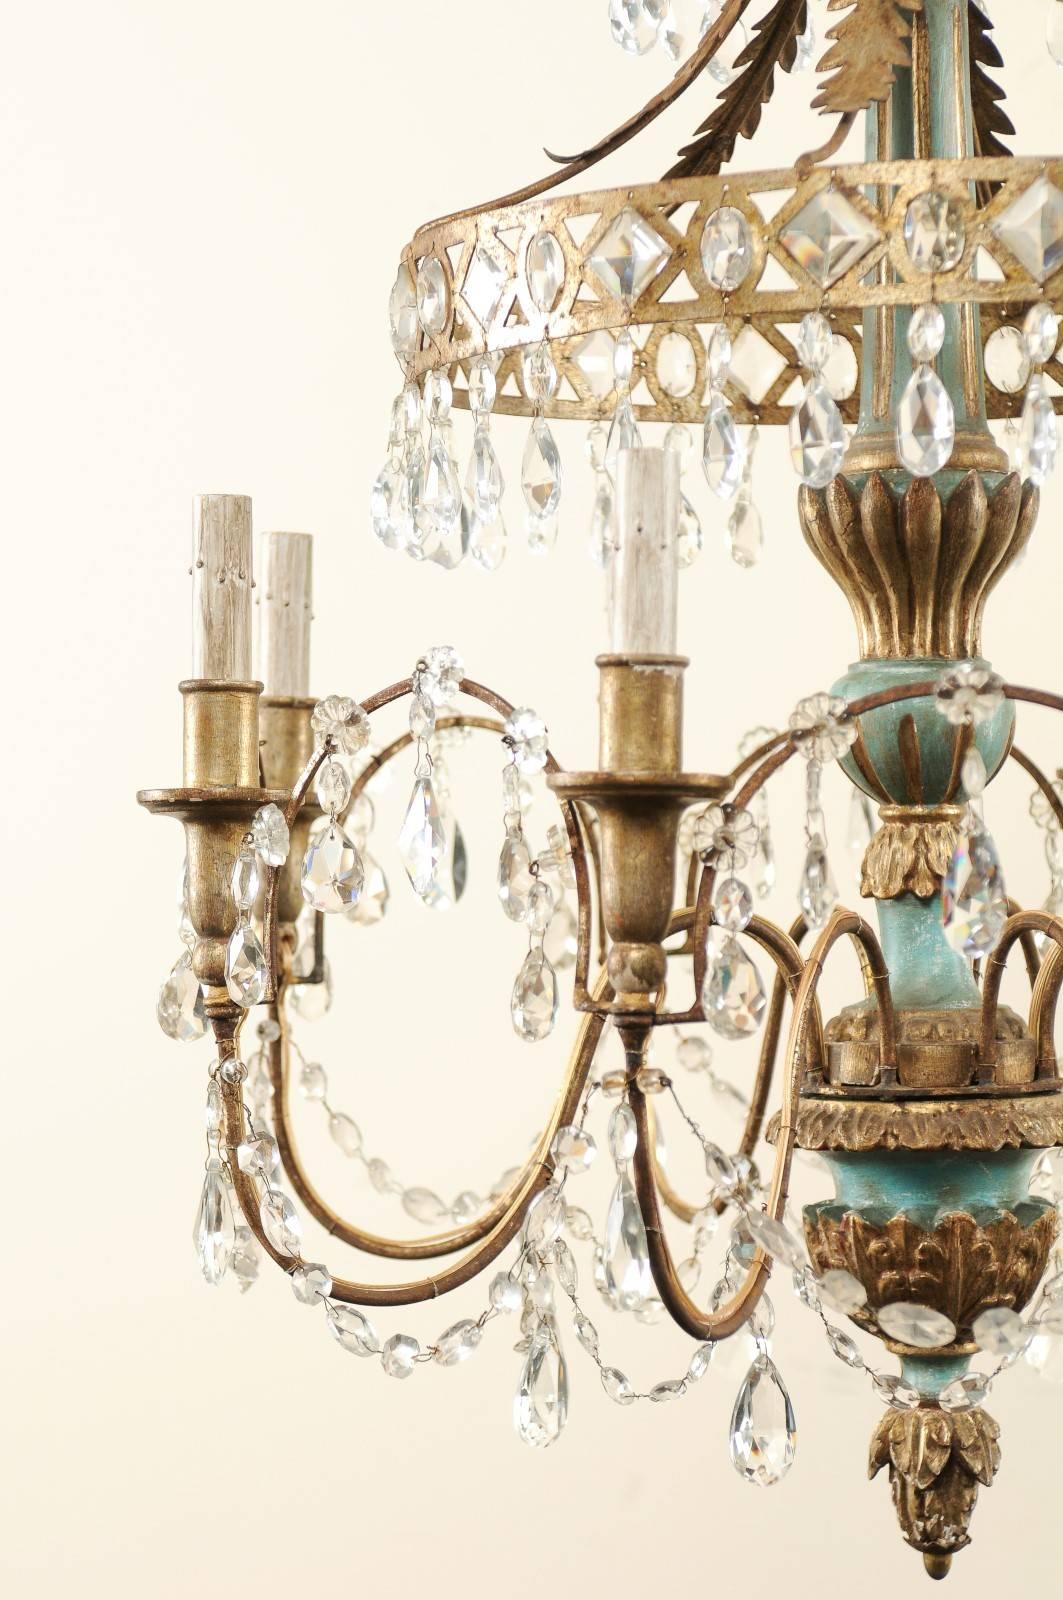 Carved Midcentury Italian Eight-Light Crystal and Wood Chandelier with Pale Teal Tones